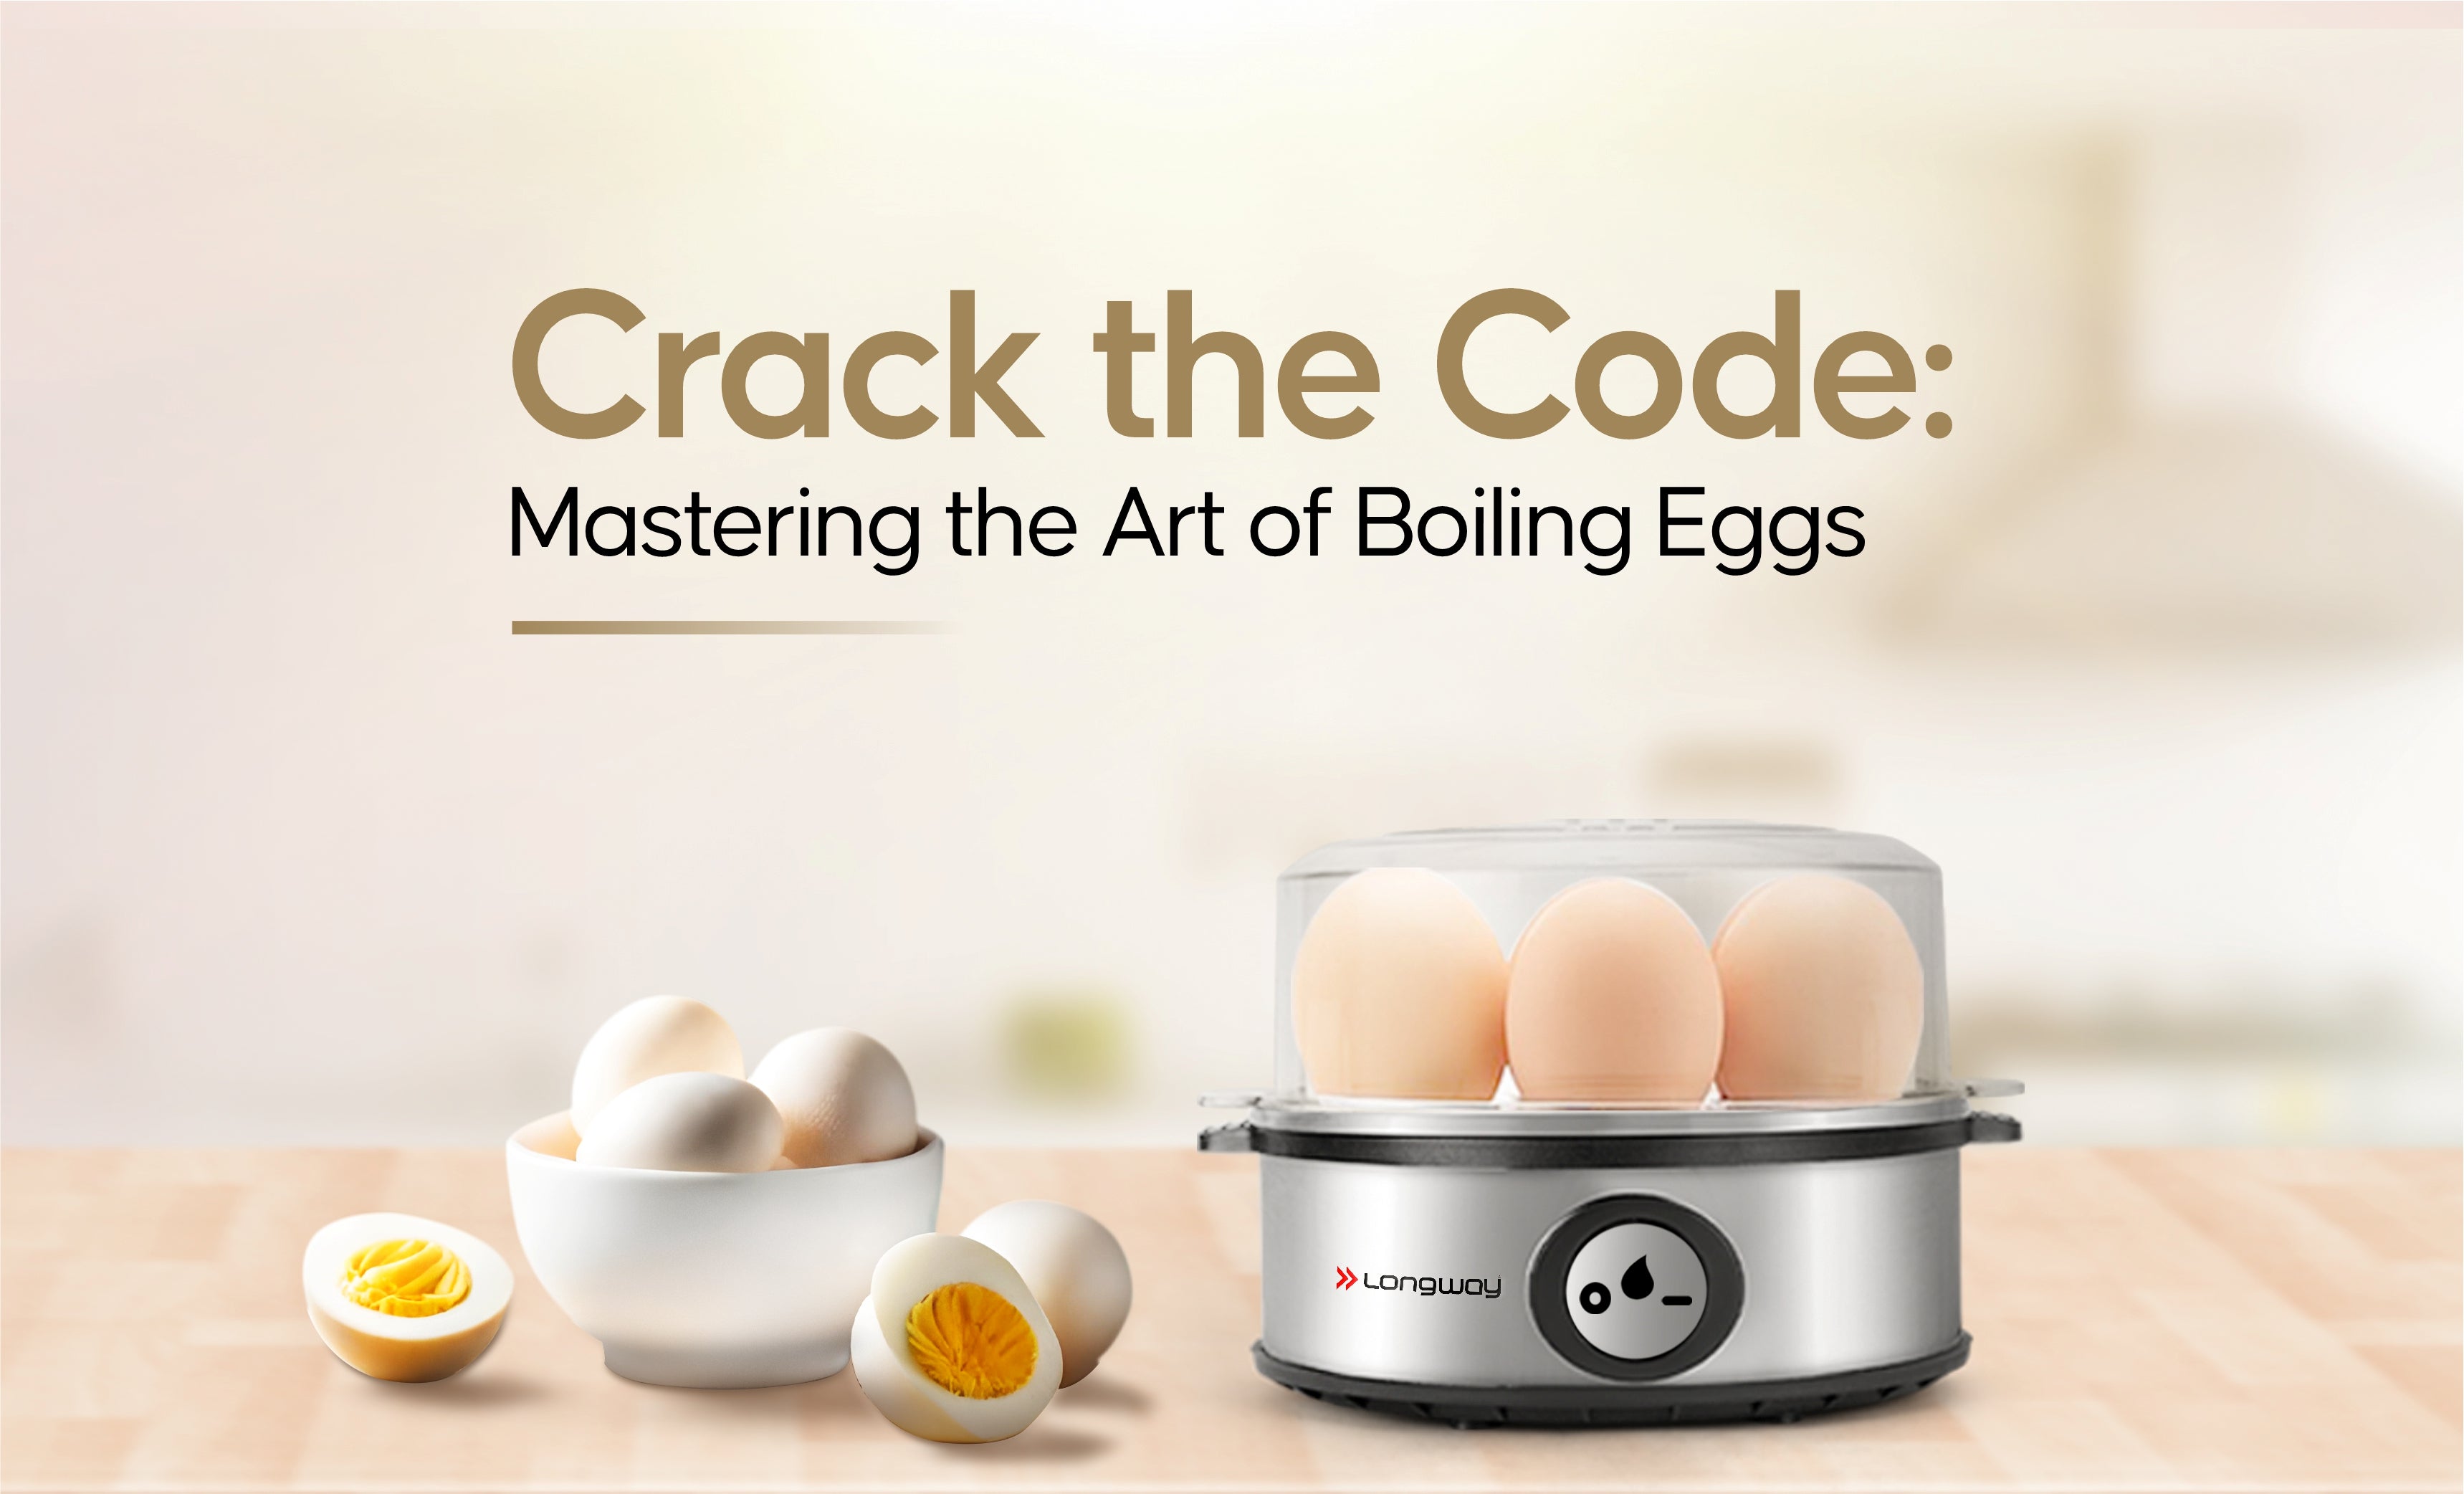 Crack the Code: Mastering the Art of Boiling Eggs